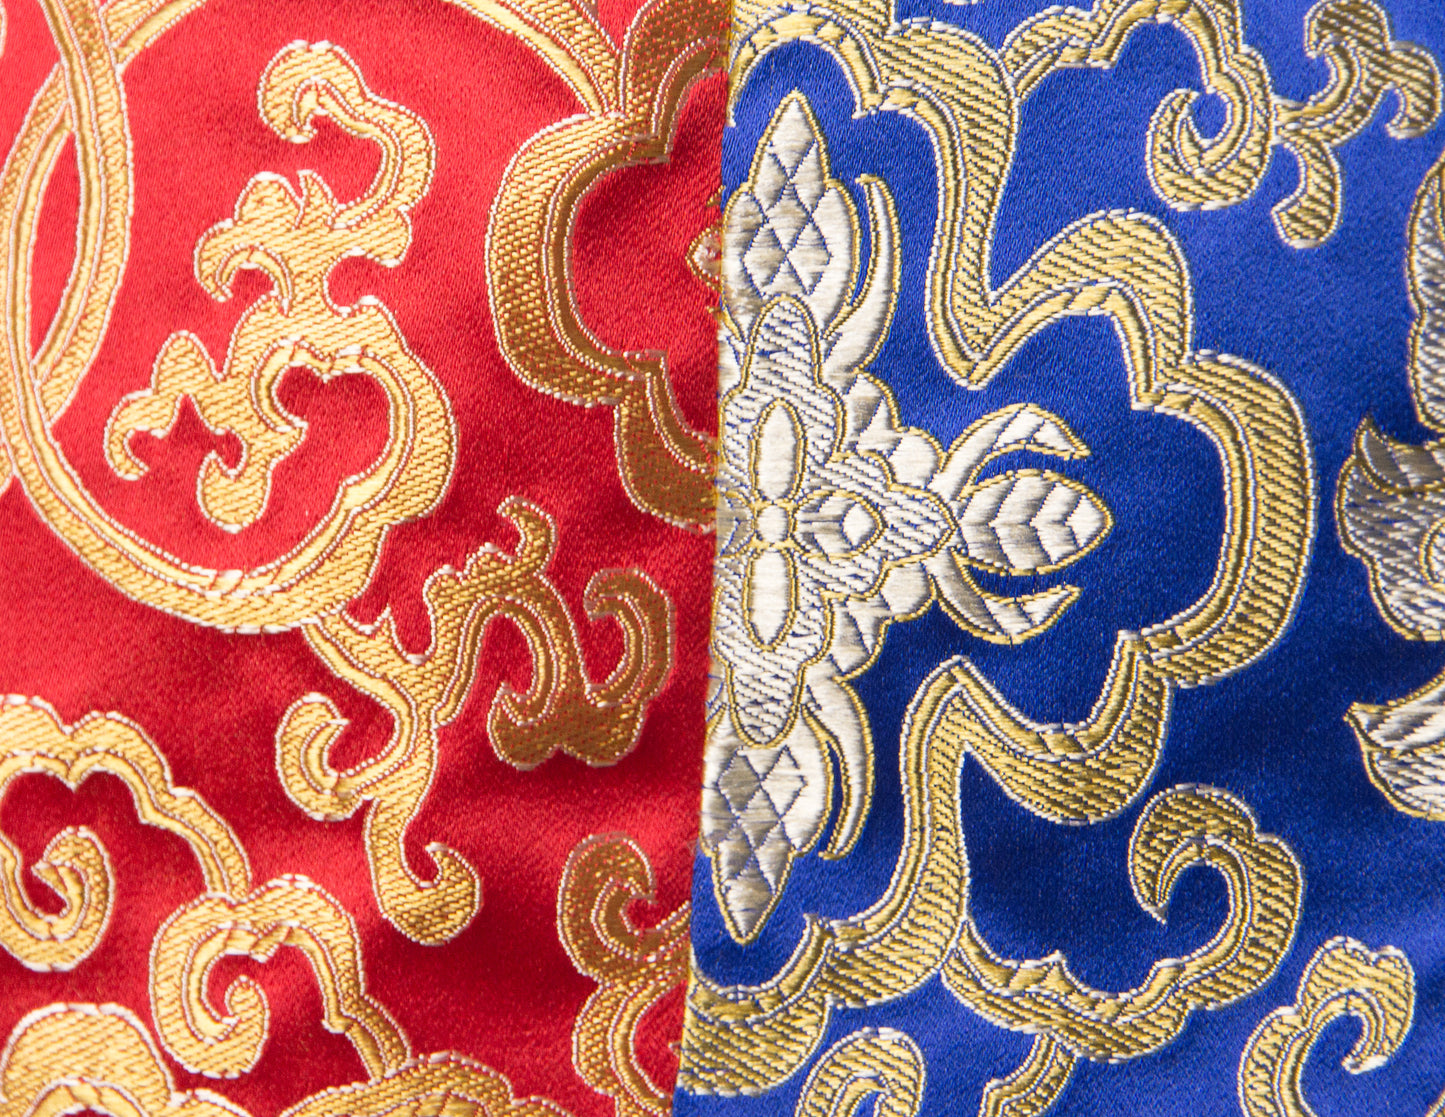 Standard Brocade Cloth / Practice Table Cover – Blue & Red